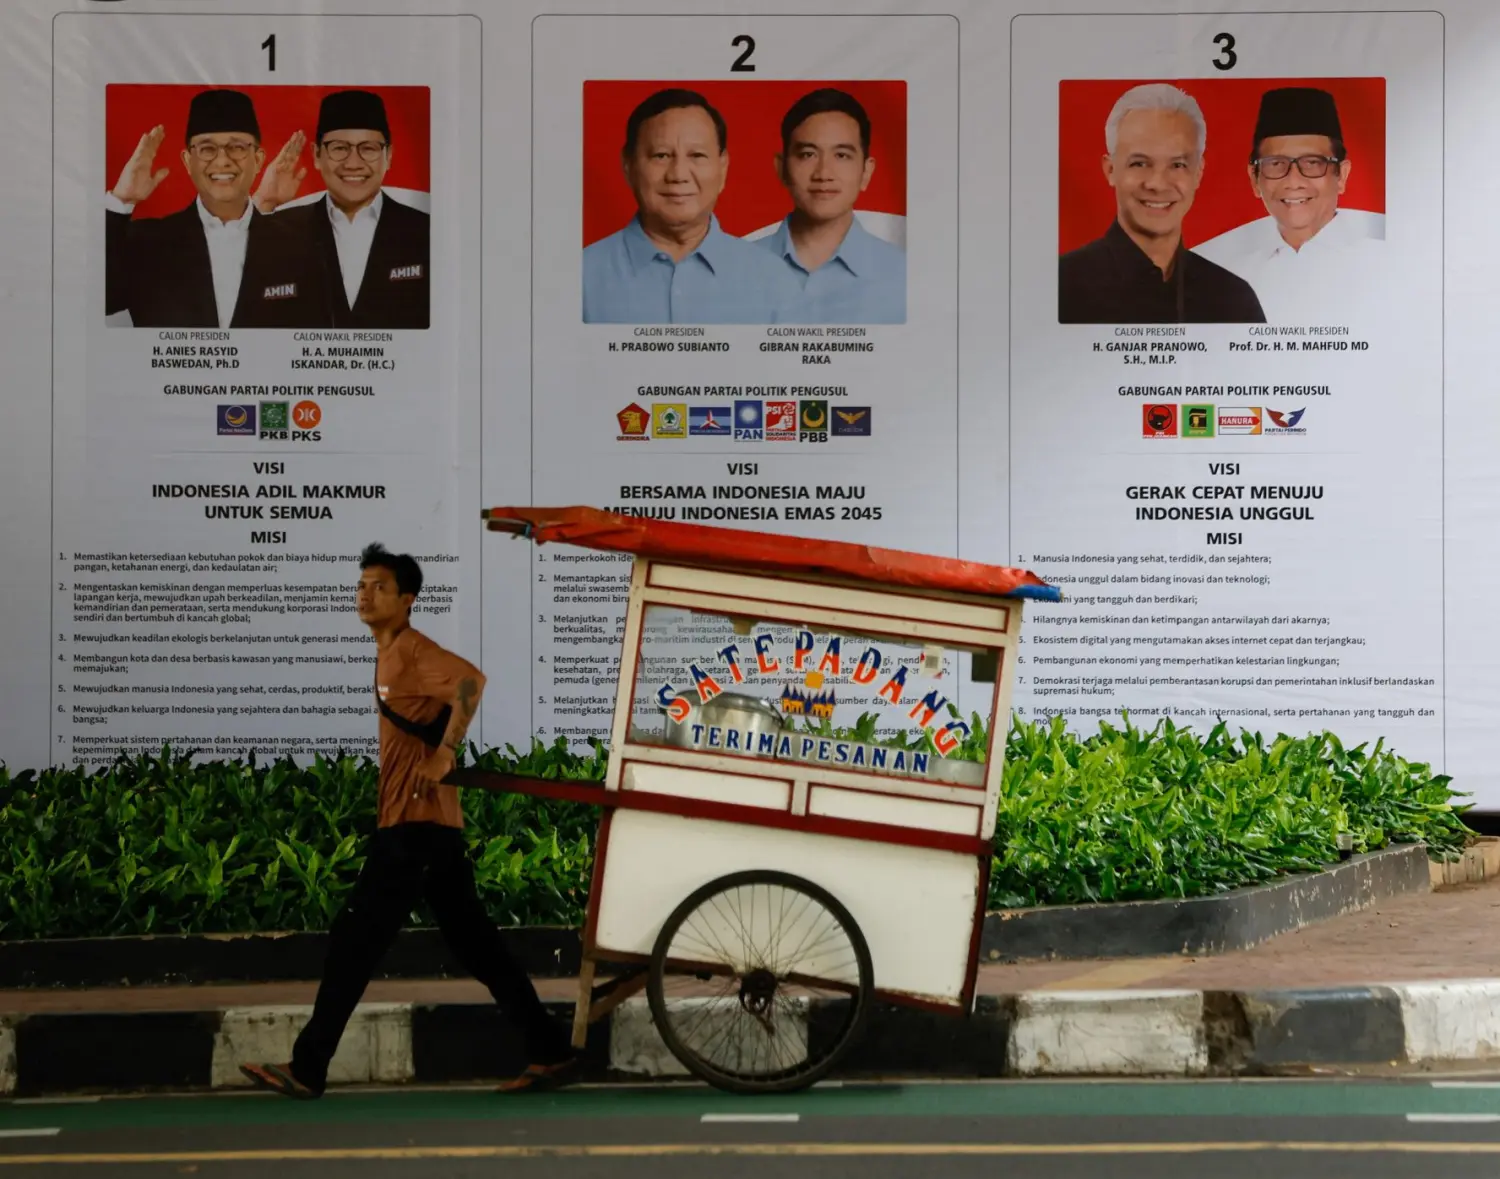 Street vendor pulls cart past banner of Indonesia's presidential candidates